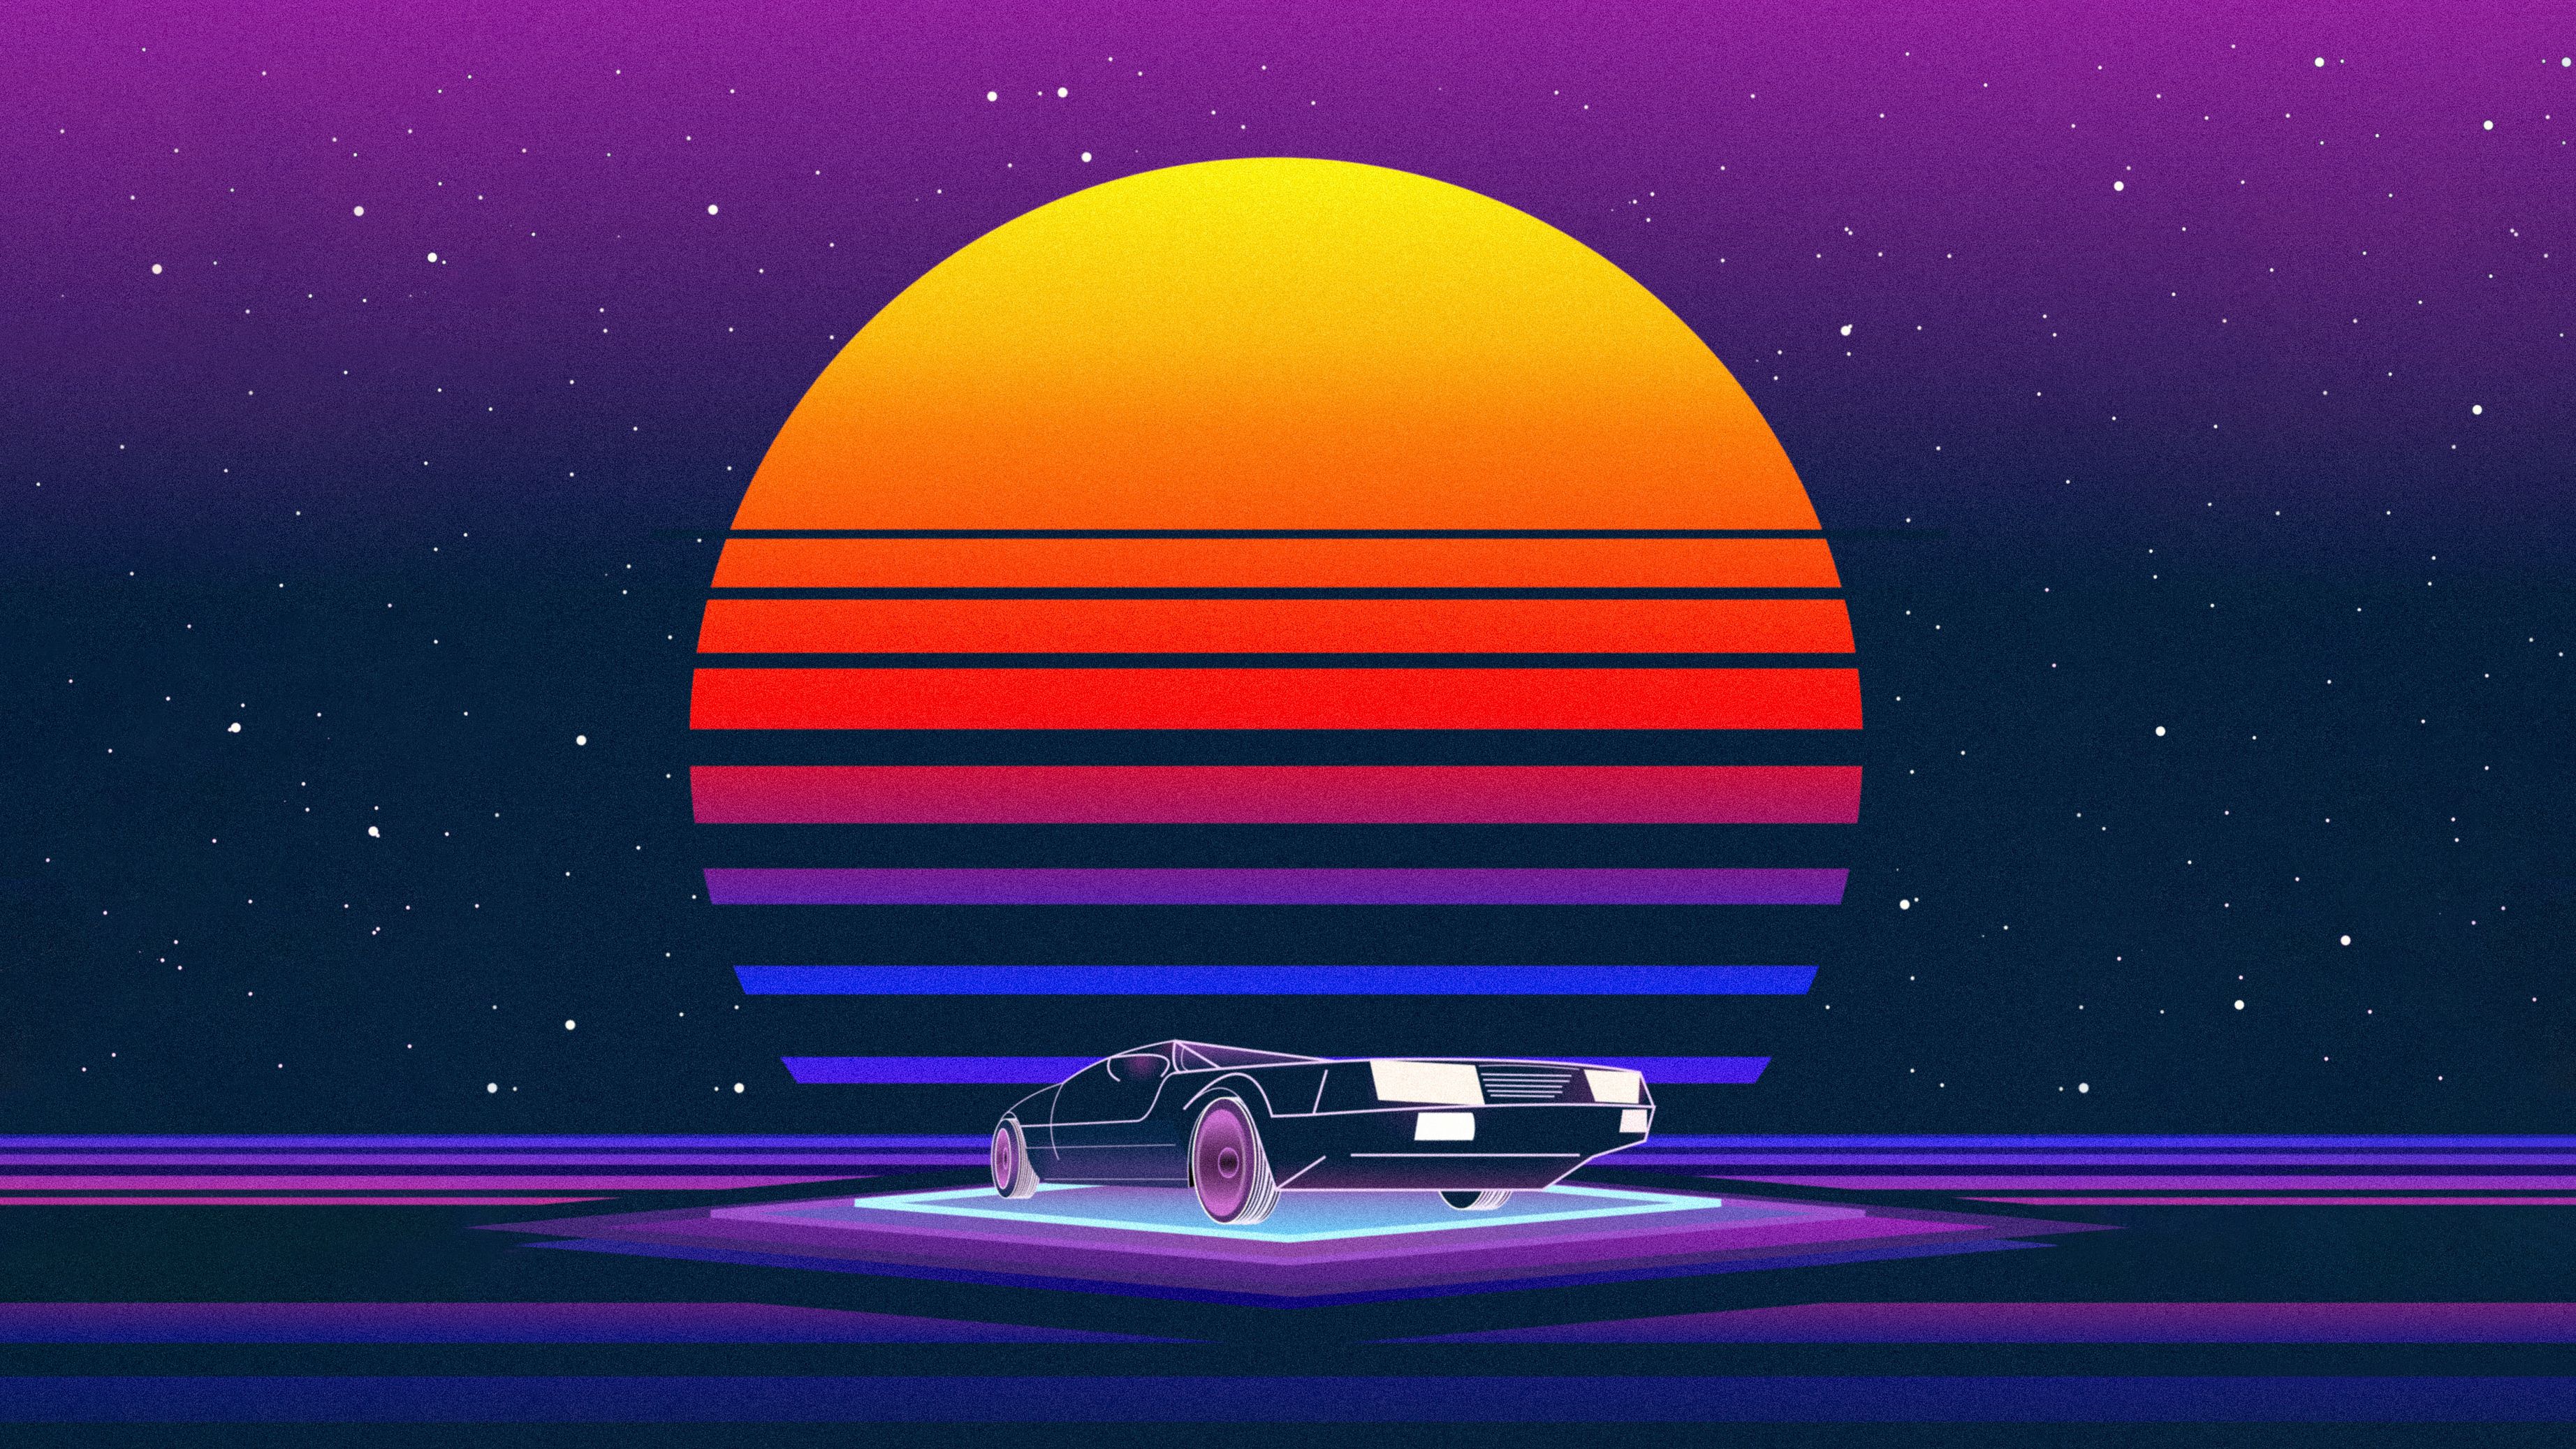 Retrowave Car 5k, HD Artist, 4k Wallpaper, Image, Background, Photo and Picture